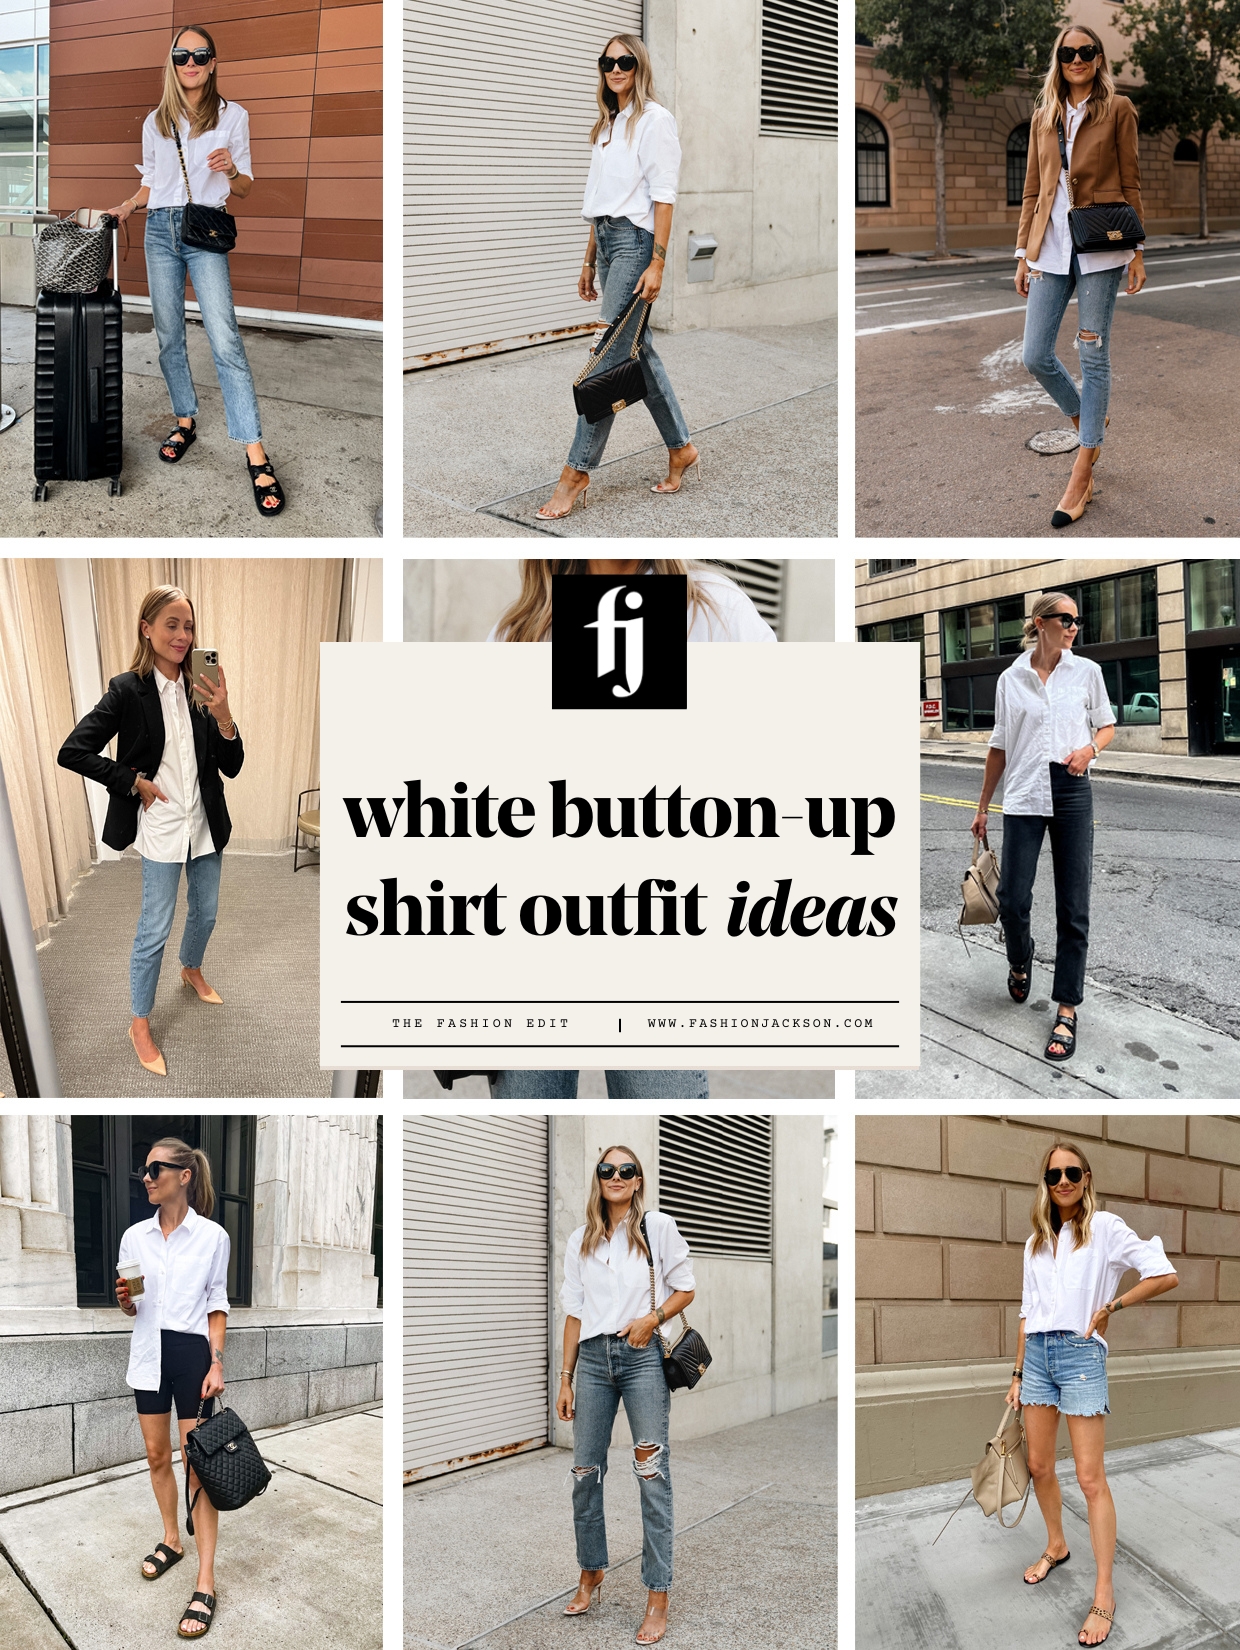 11 Chic Button-Up Shirt Outfits for Women